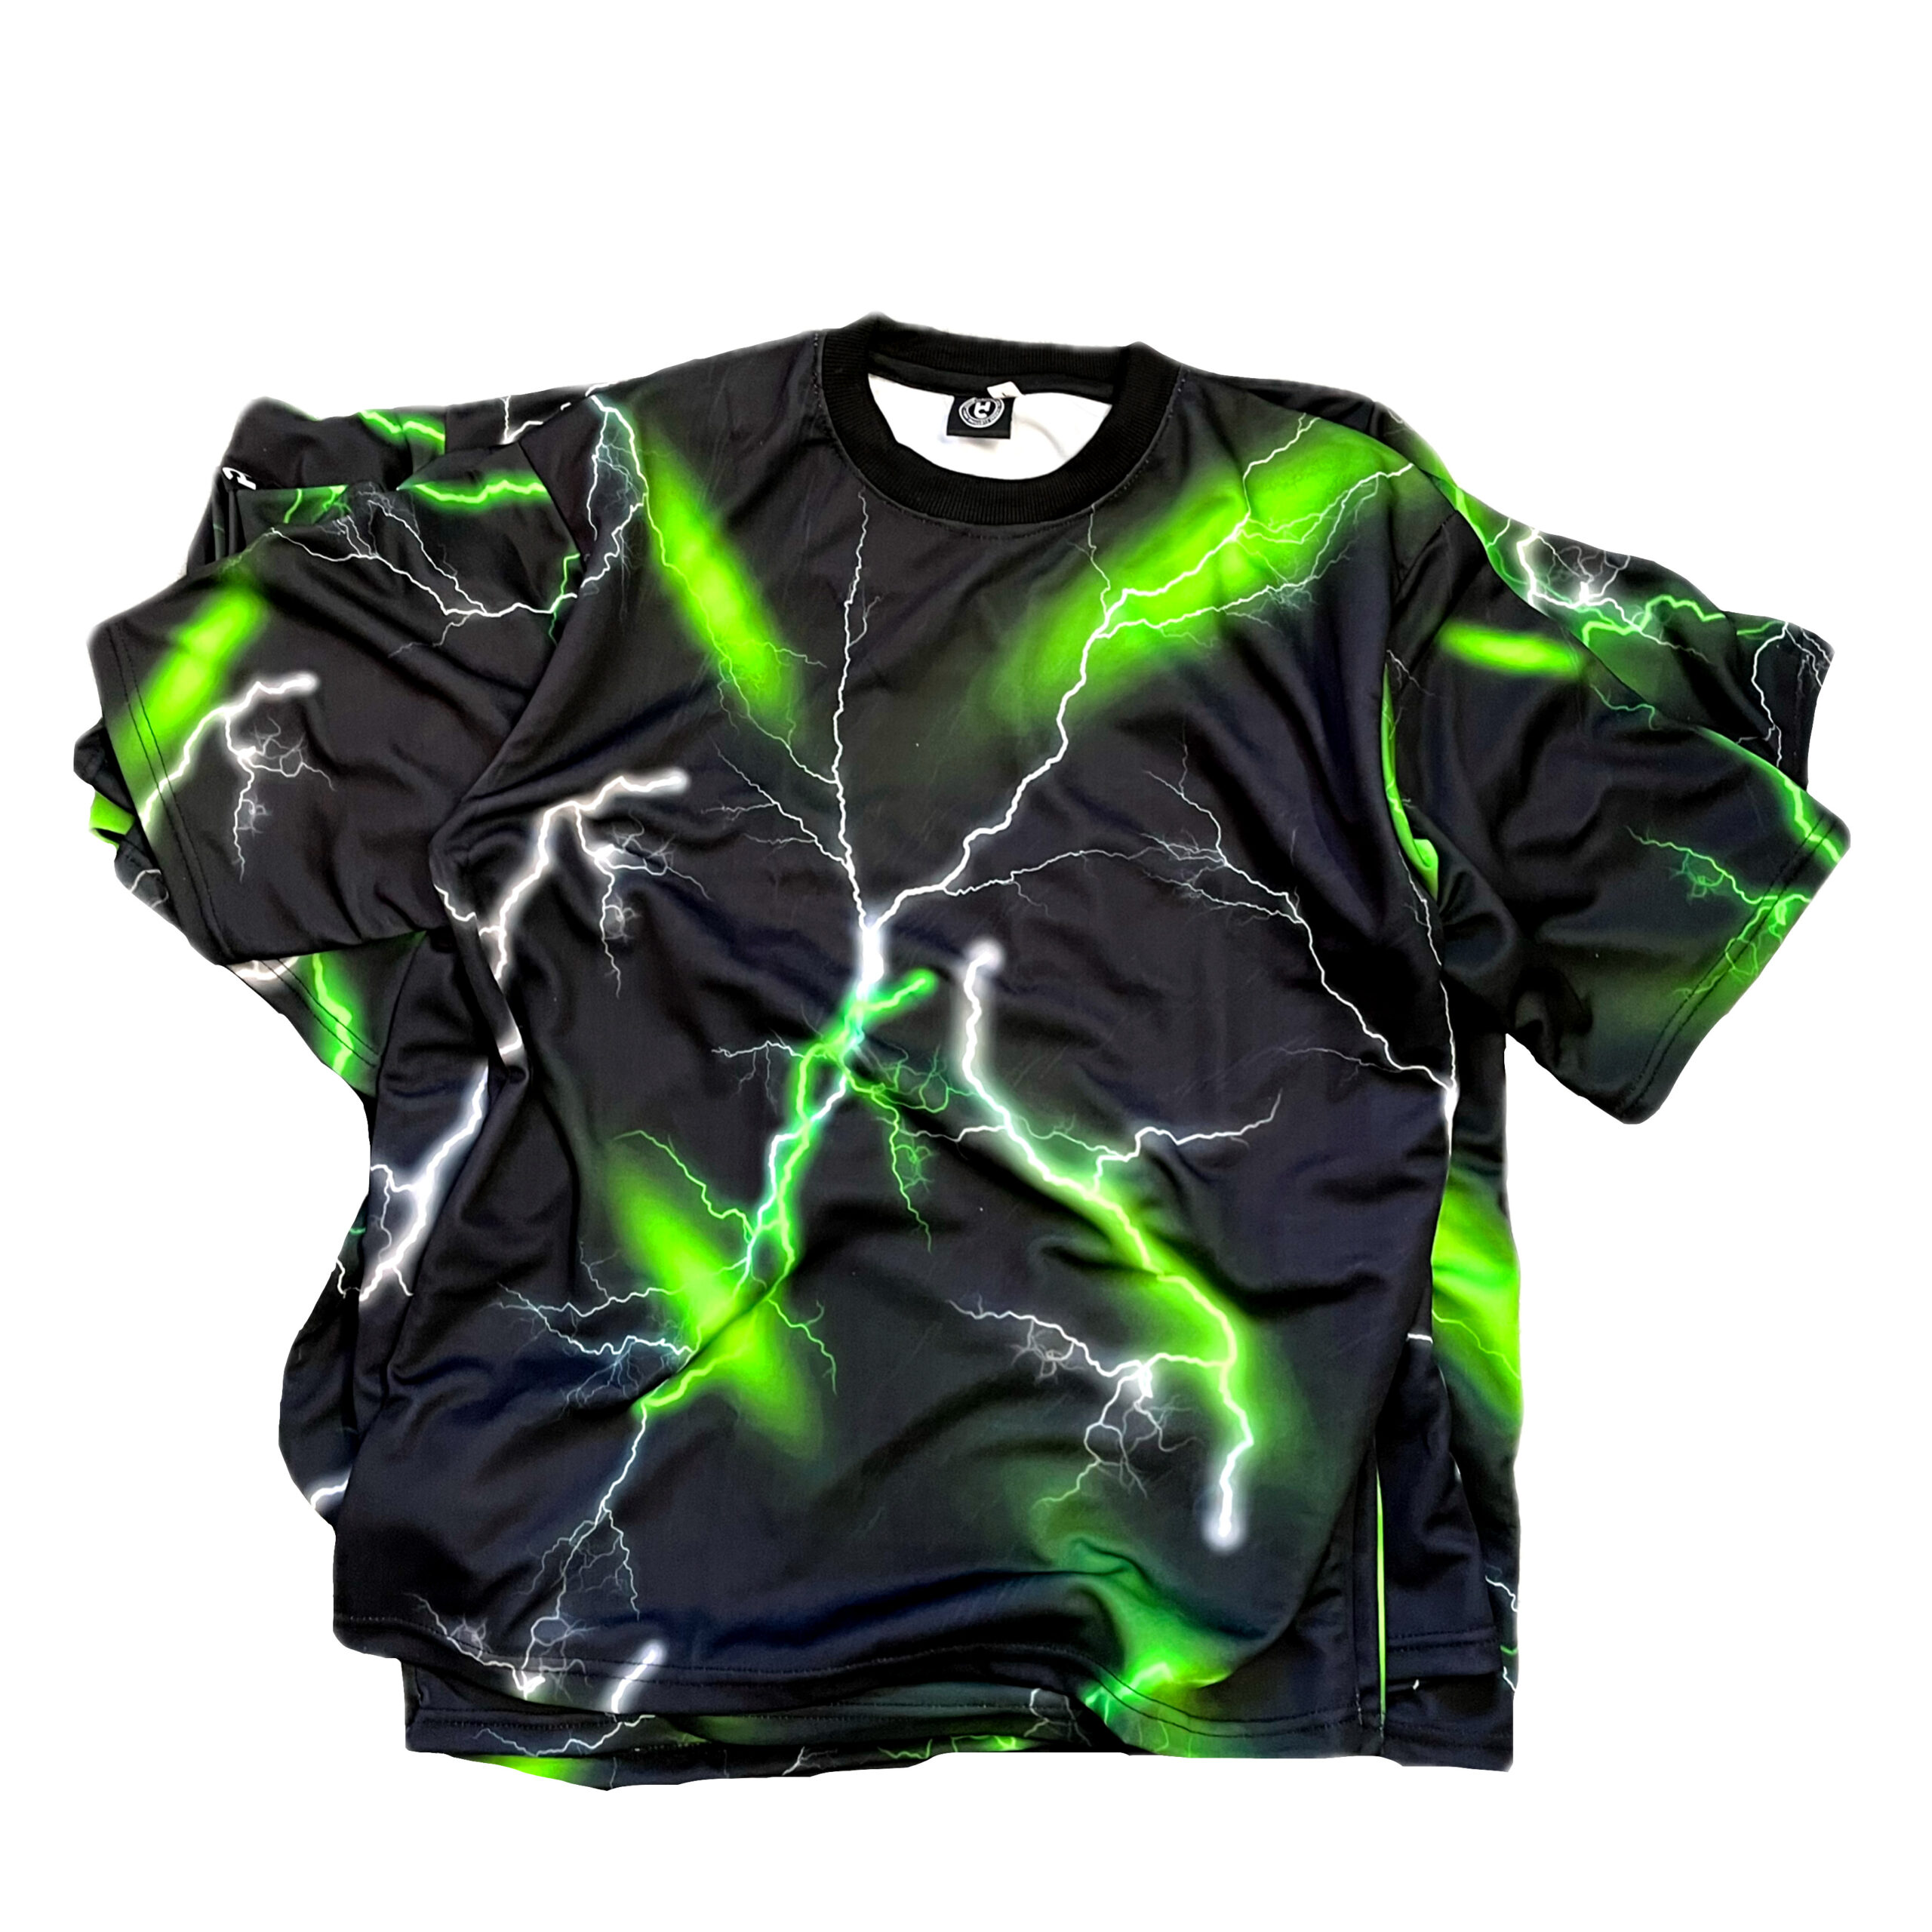 Neon thunder printed t-shirt – Hiphop clothing india store